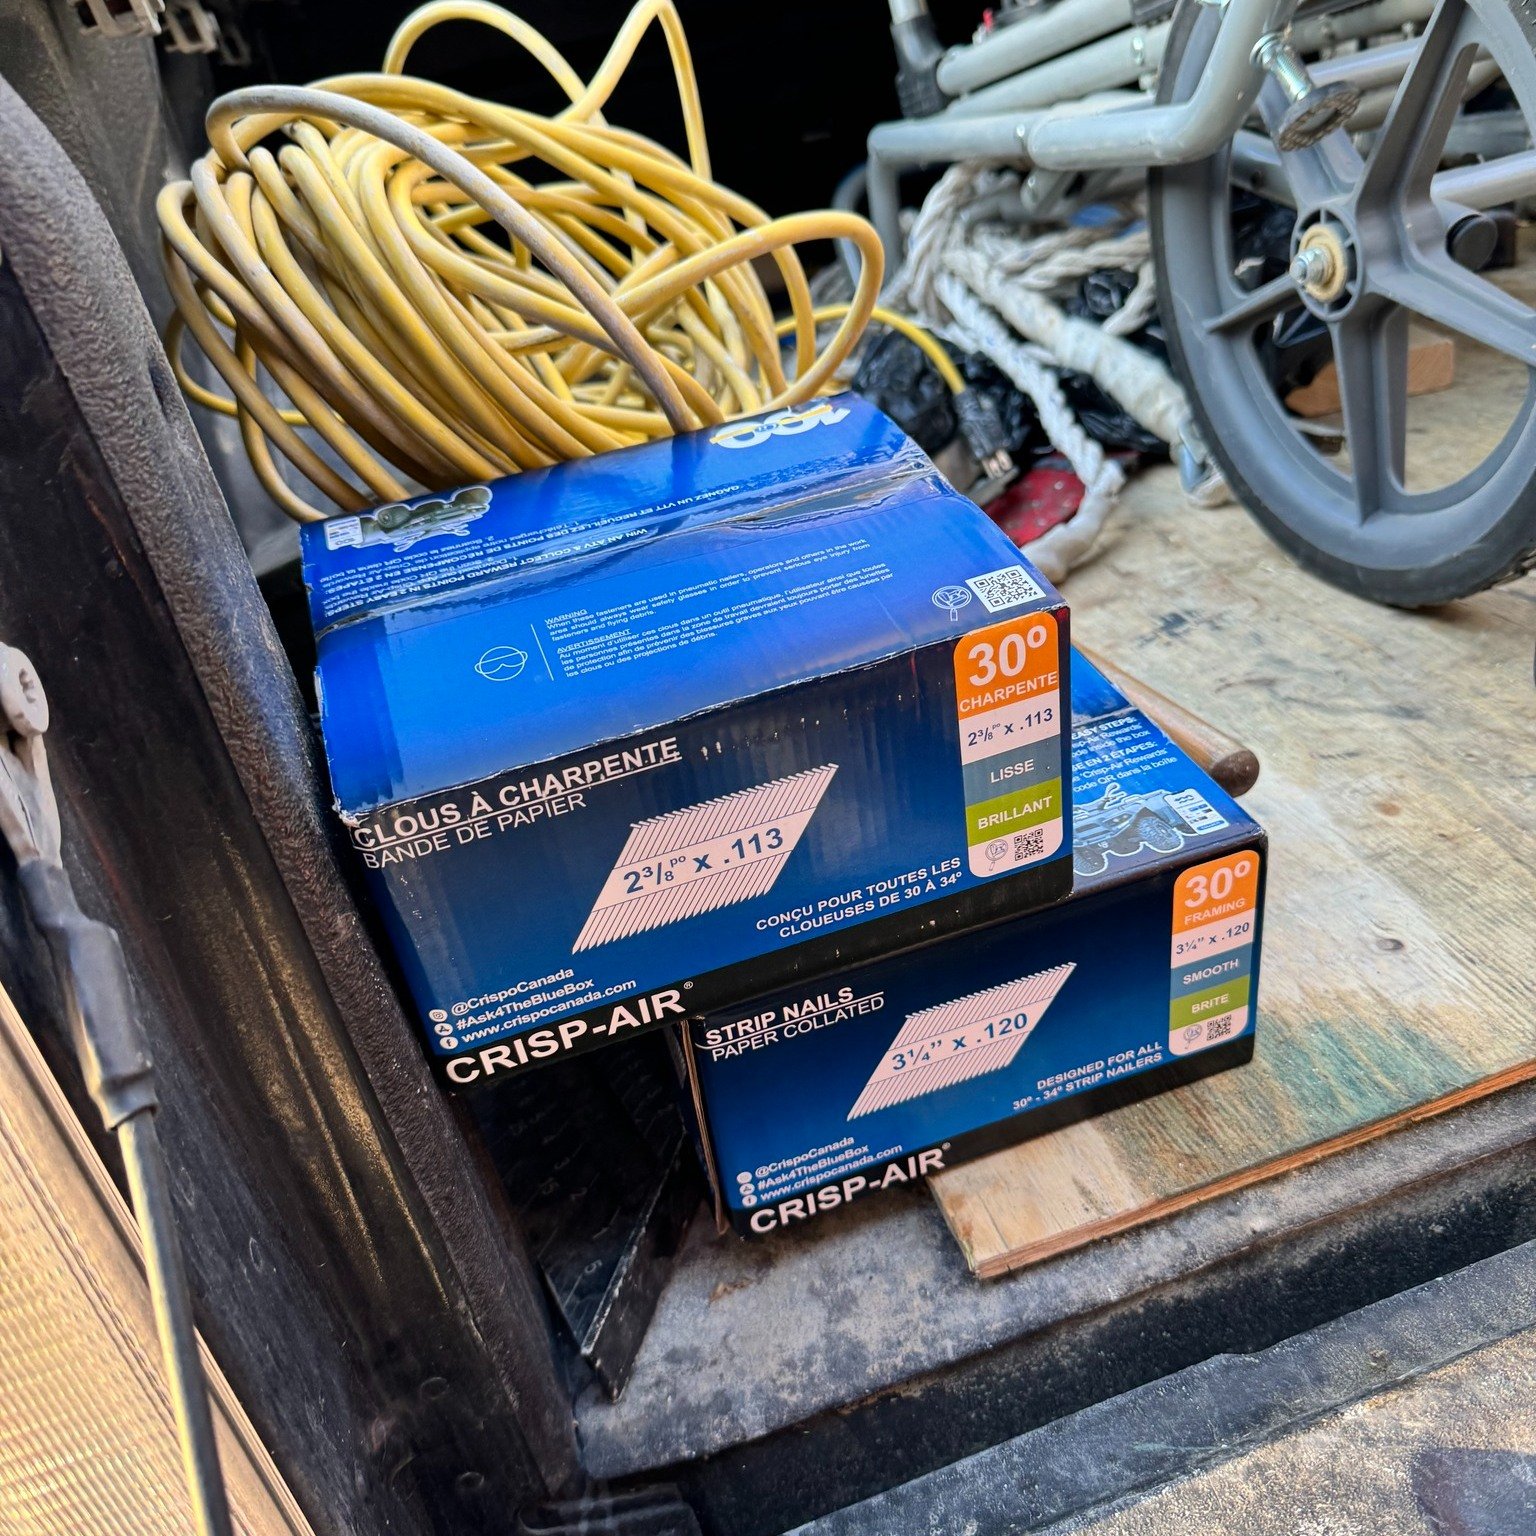 You know you're in good hands when you've got your blue boxes packed in the truck. Crisp-Air Nails are the go-to choice for construction professionals who demand precision, quality, and durability 🟦  #Ask4TheBlueBox 

 #crispocanada #crispair #frami